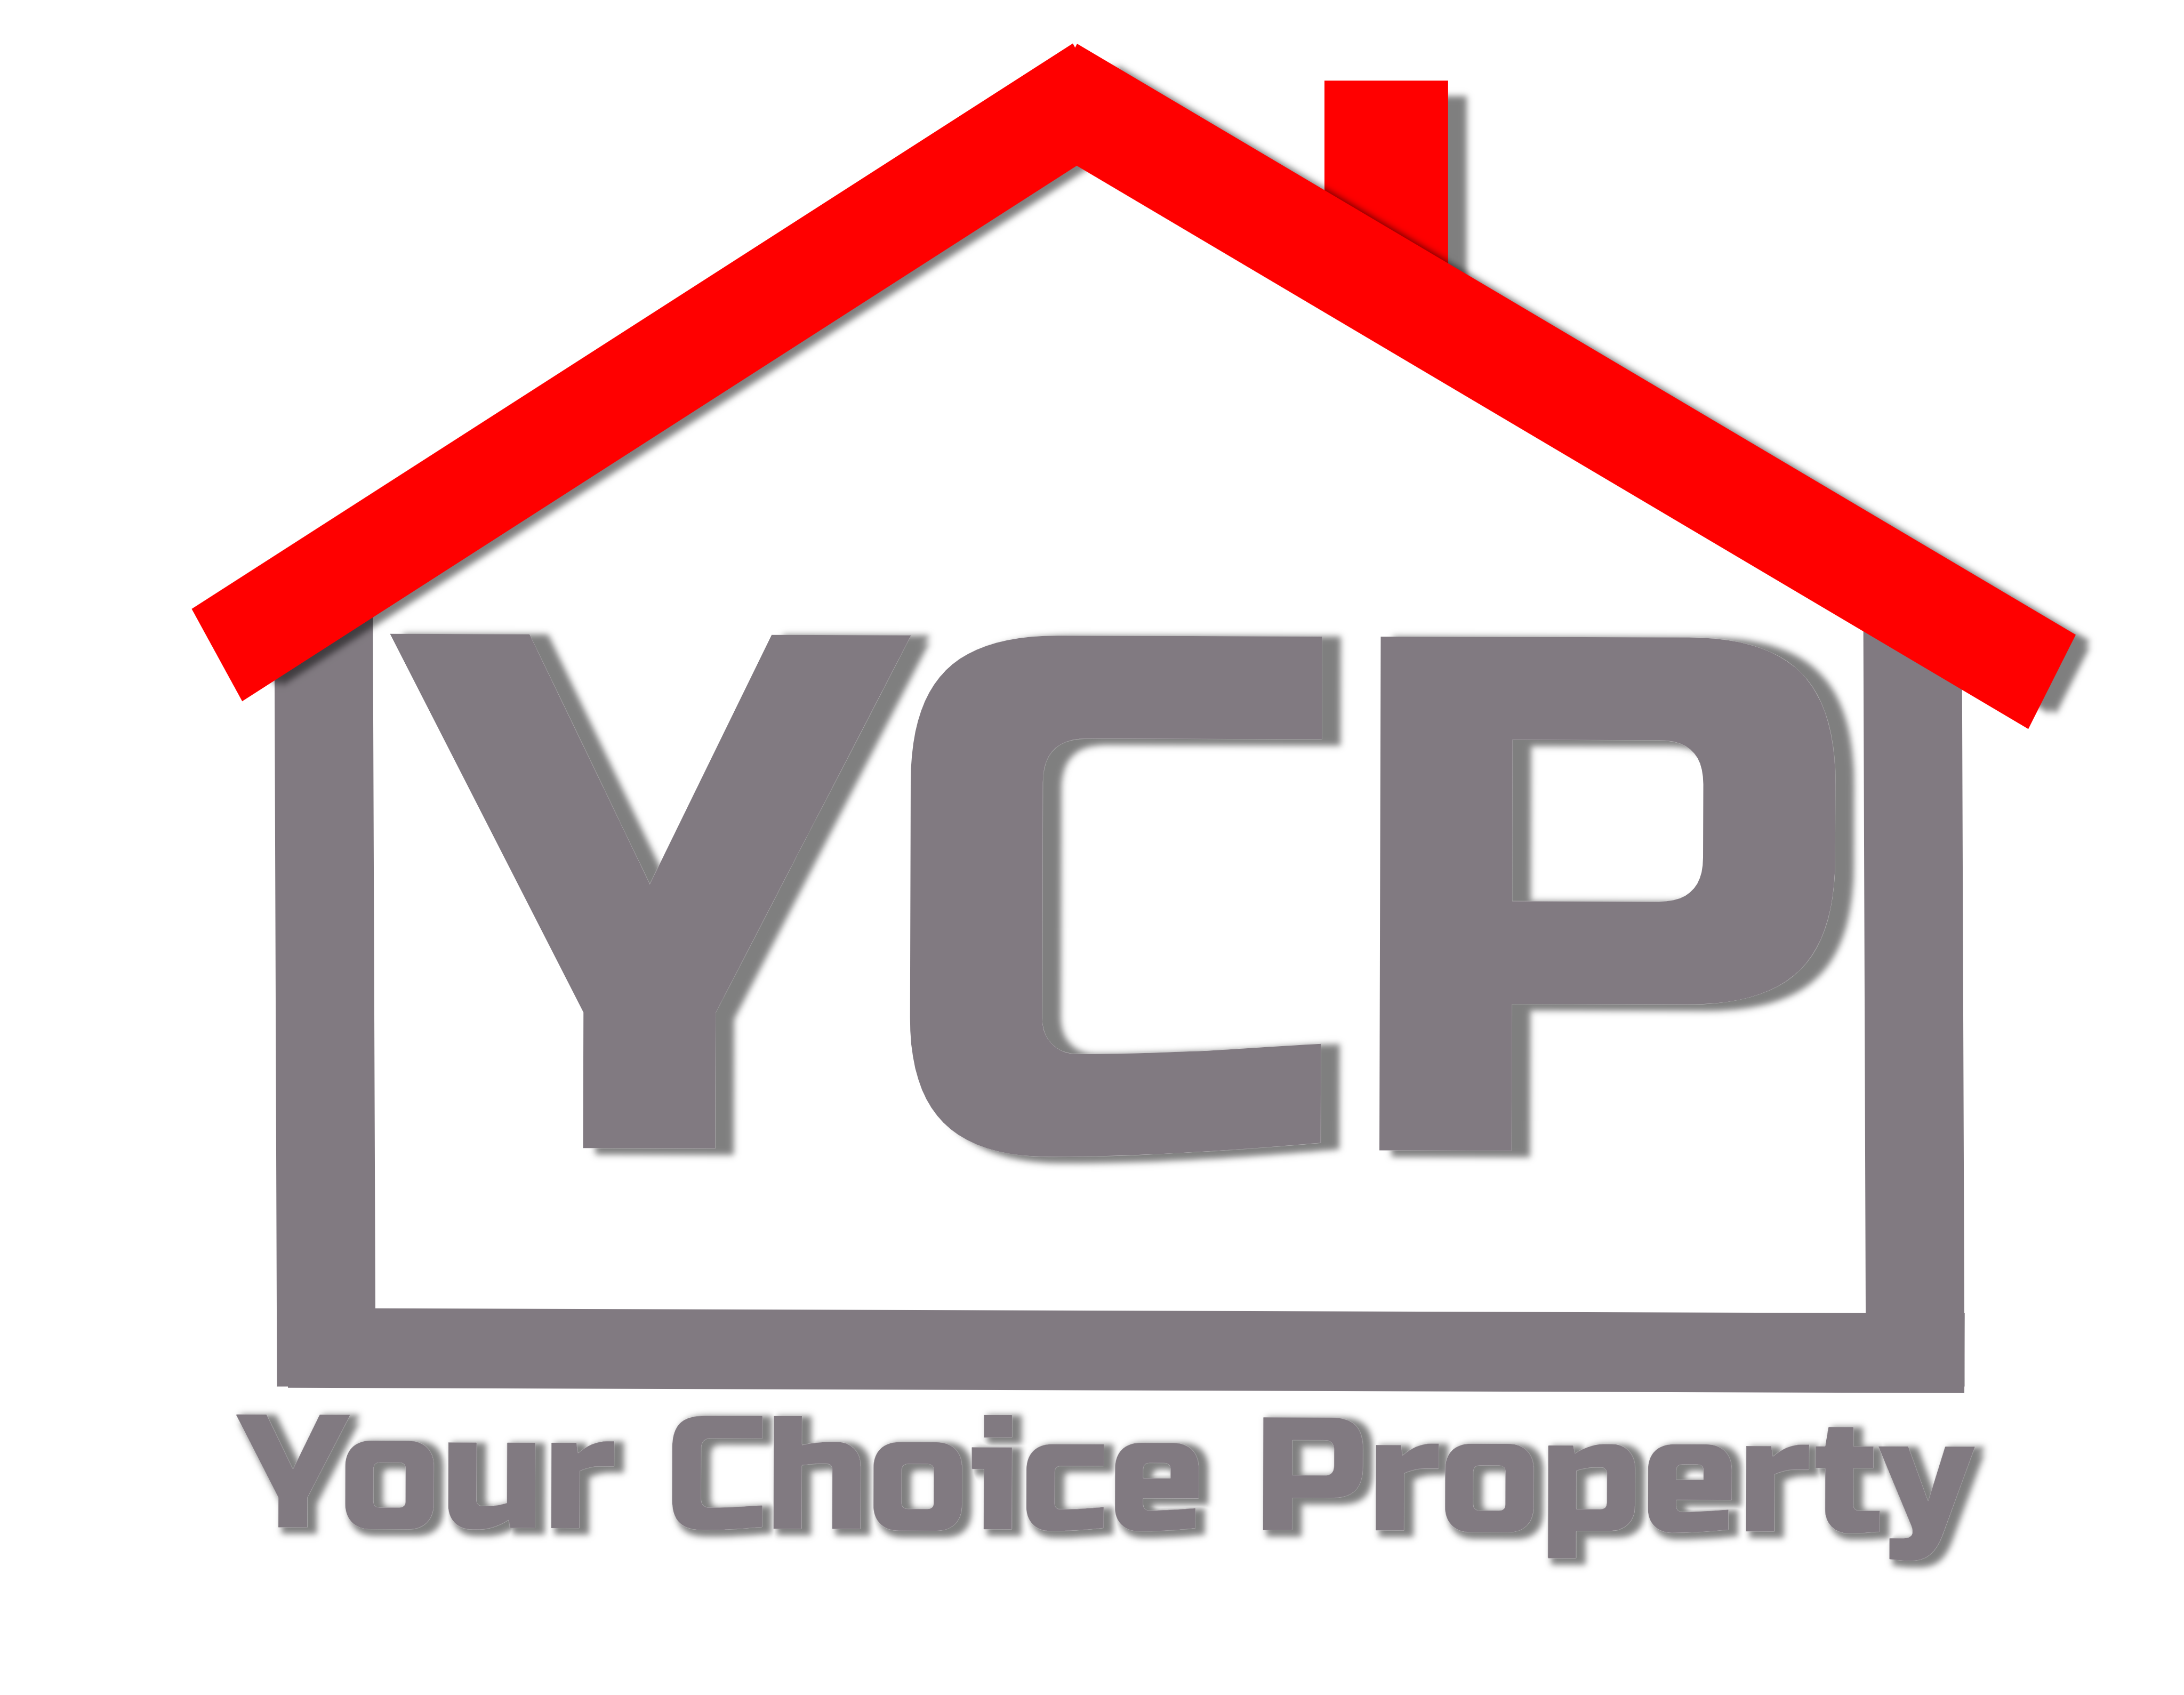 Your Choice Property